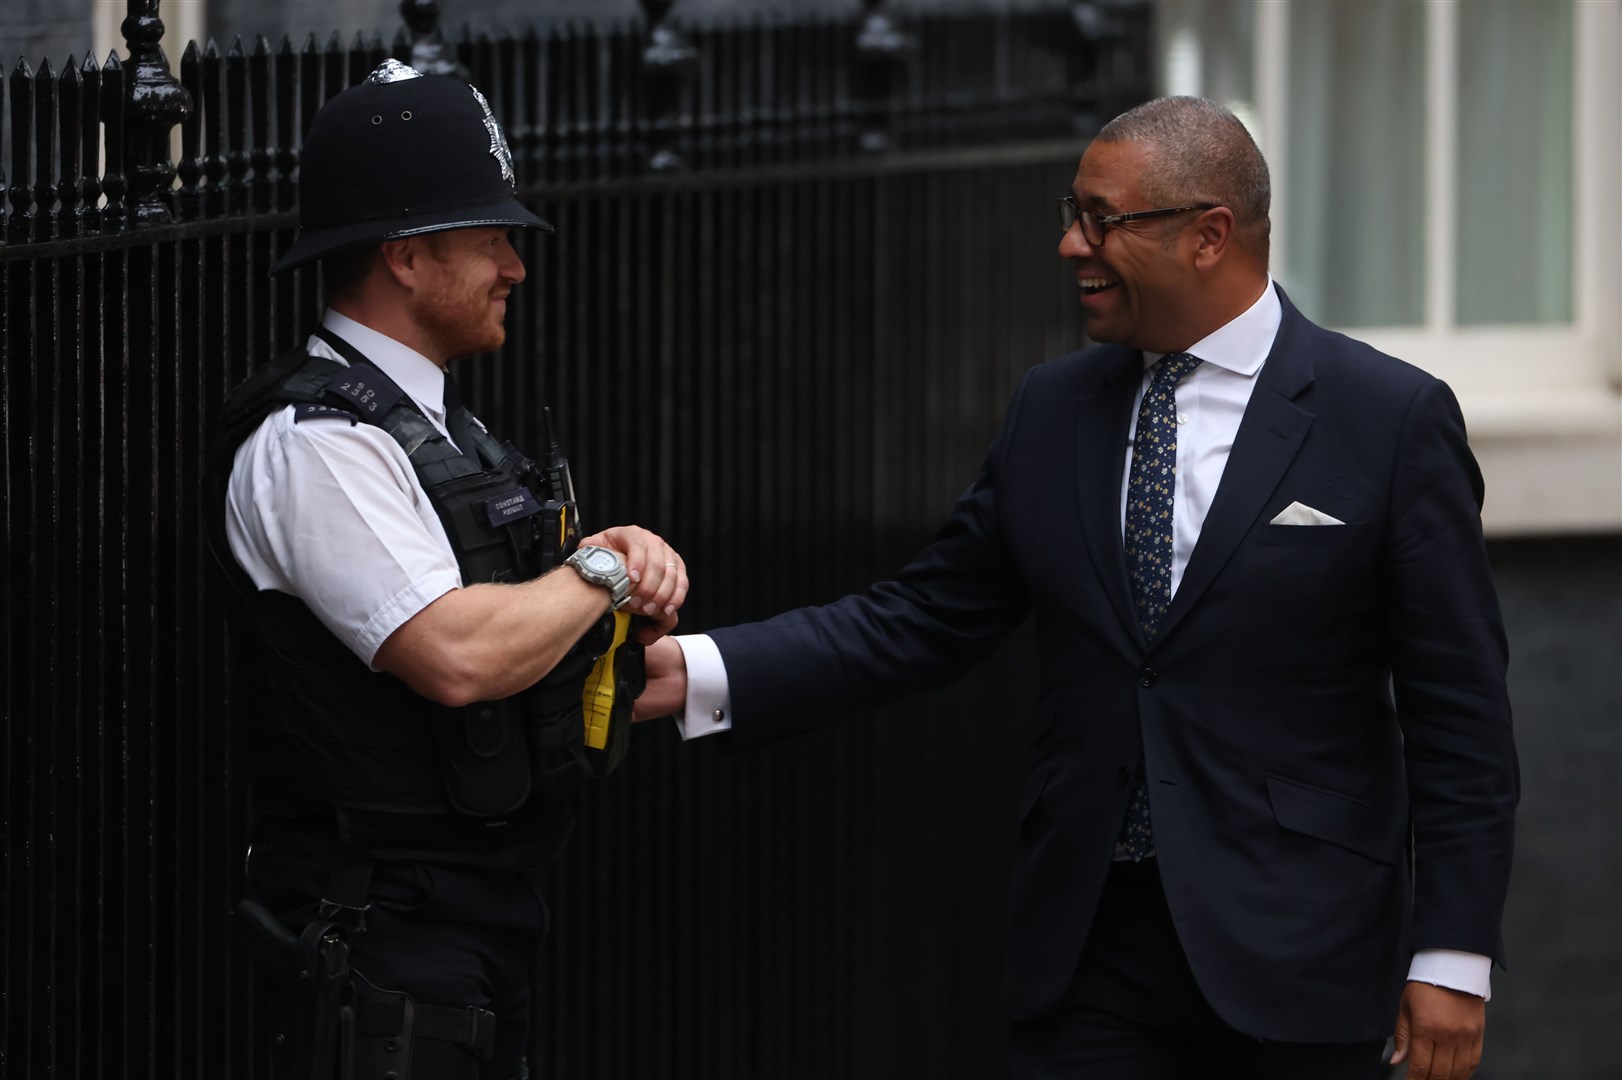 James Cleverly greets a police officer as he arrives for a meeting with Prime Minister Liz Truss at Downing Street (James Manning/PA)